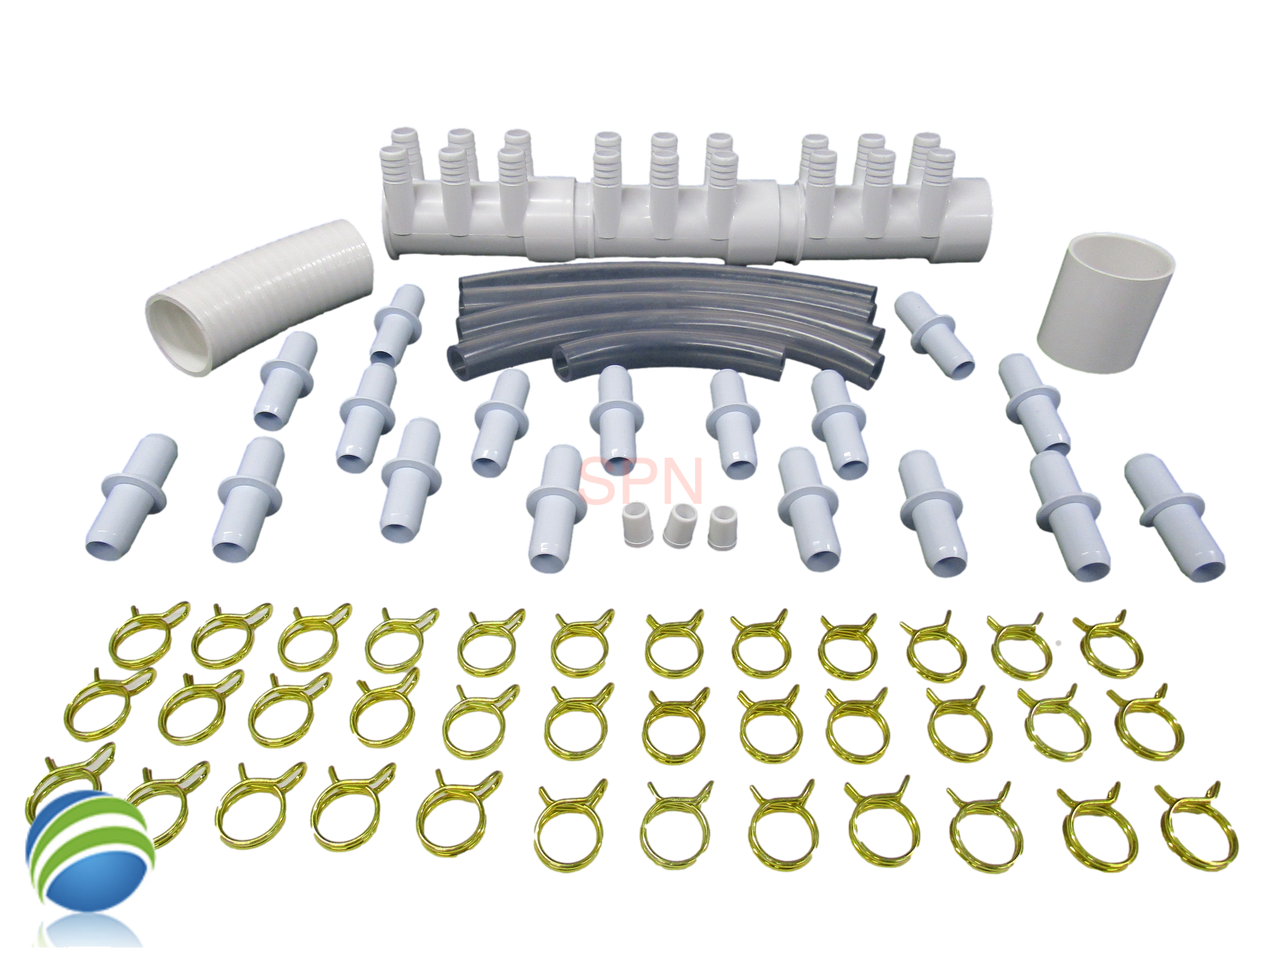 Manifold Hot Tub Spa Dead End (18) 3/4" Outlets with Coupler Kit Video How To